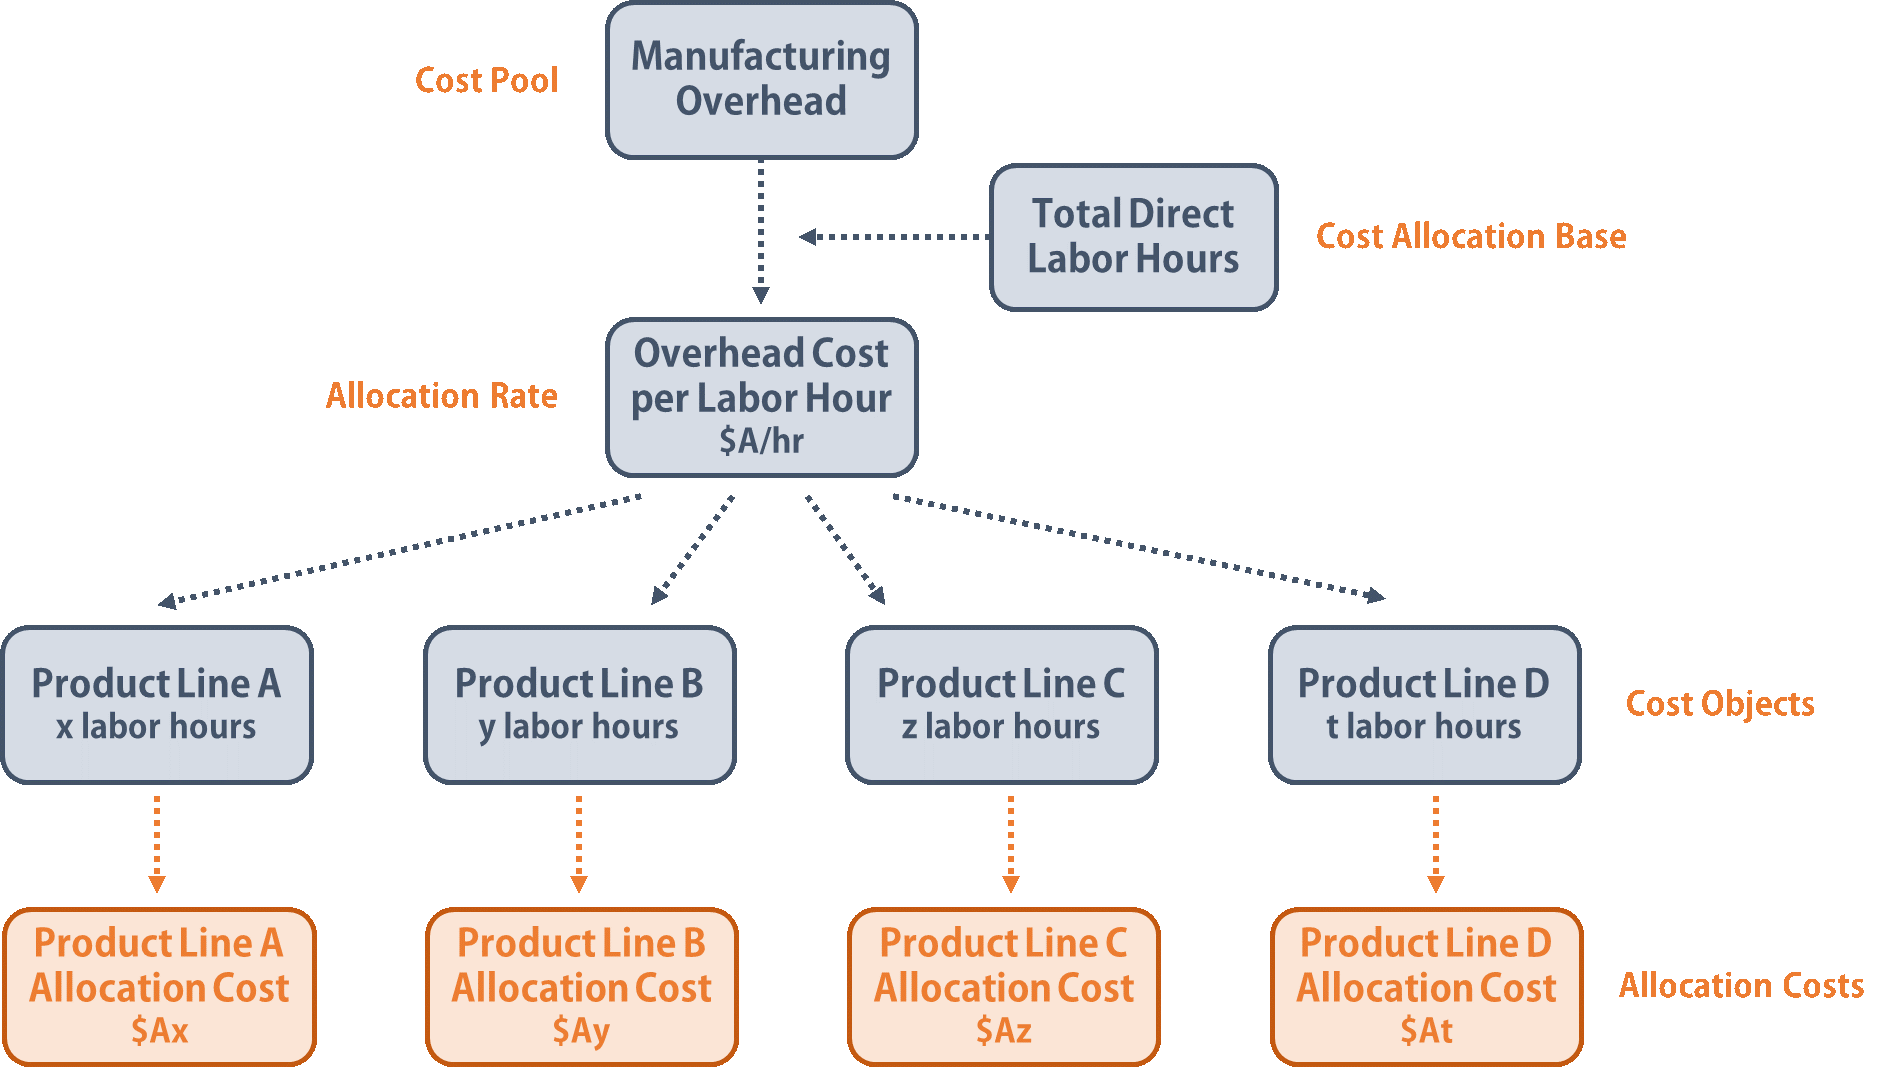 cost structure in a business plan